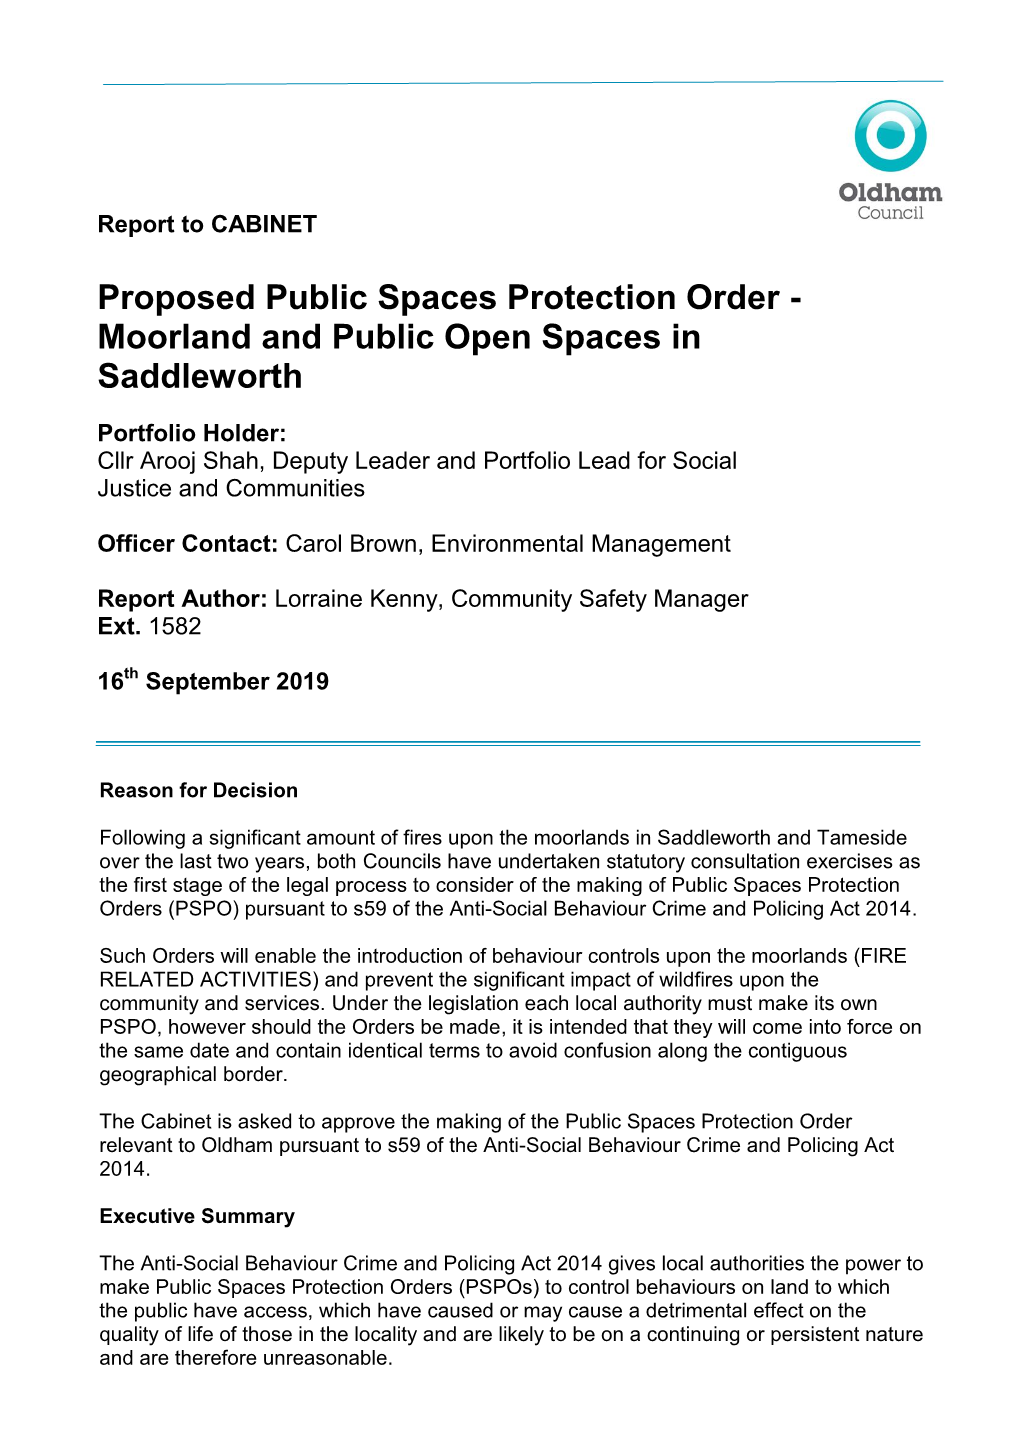 Proposed Public Spaces Protection Order - Moorland and Public Open Spaces in Saddleworth